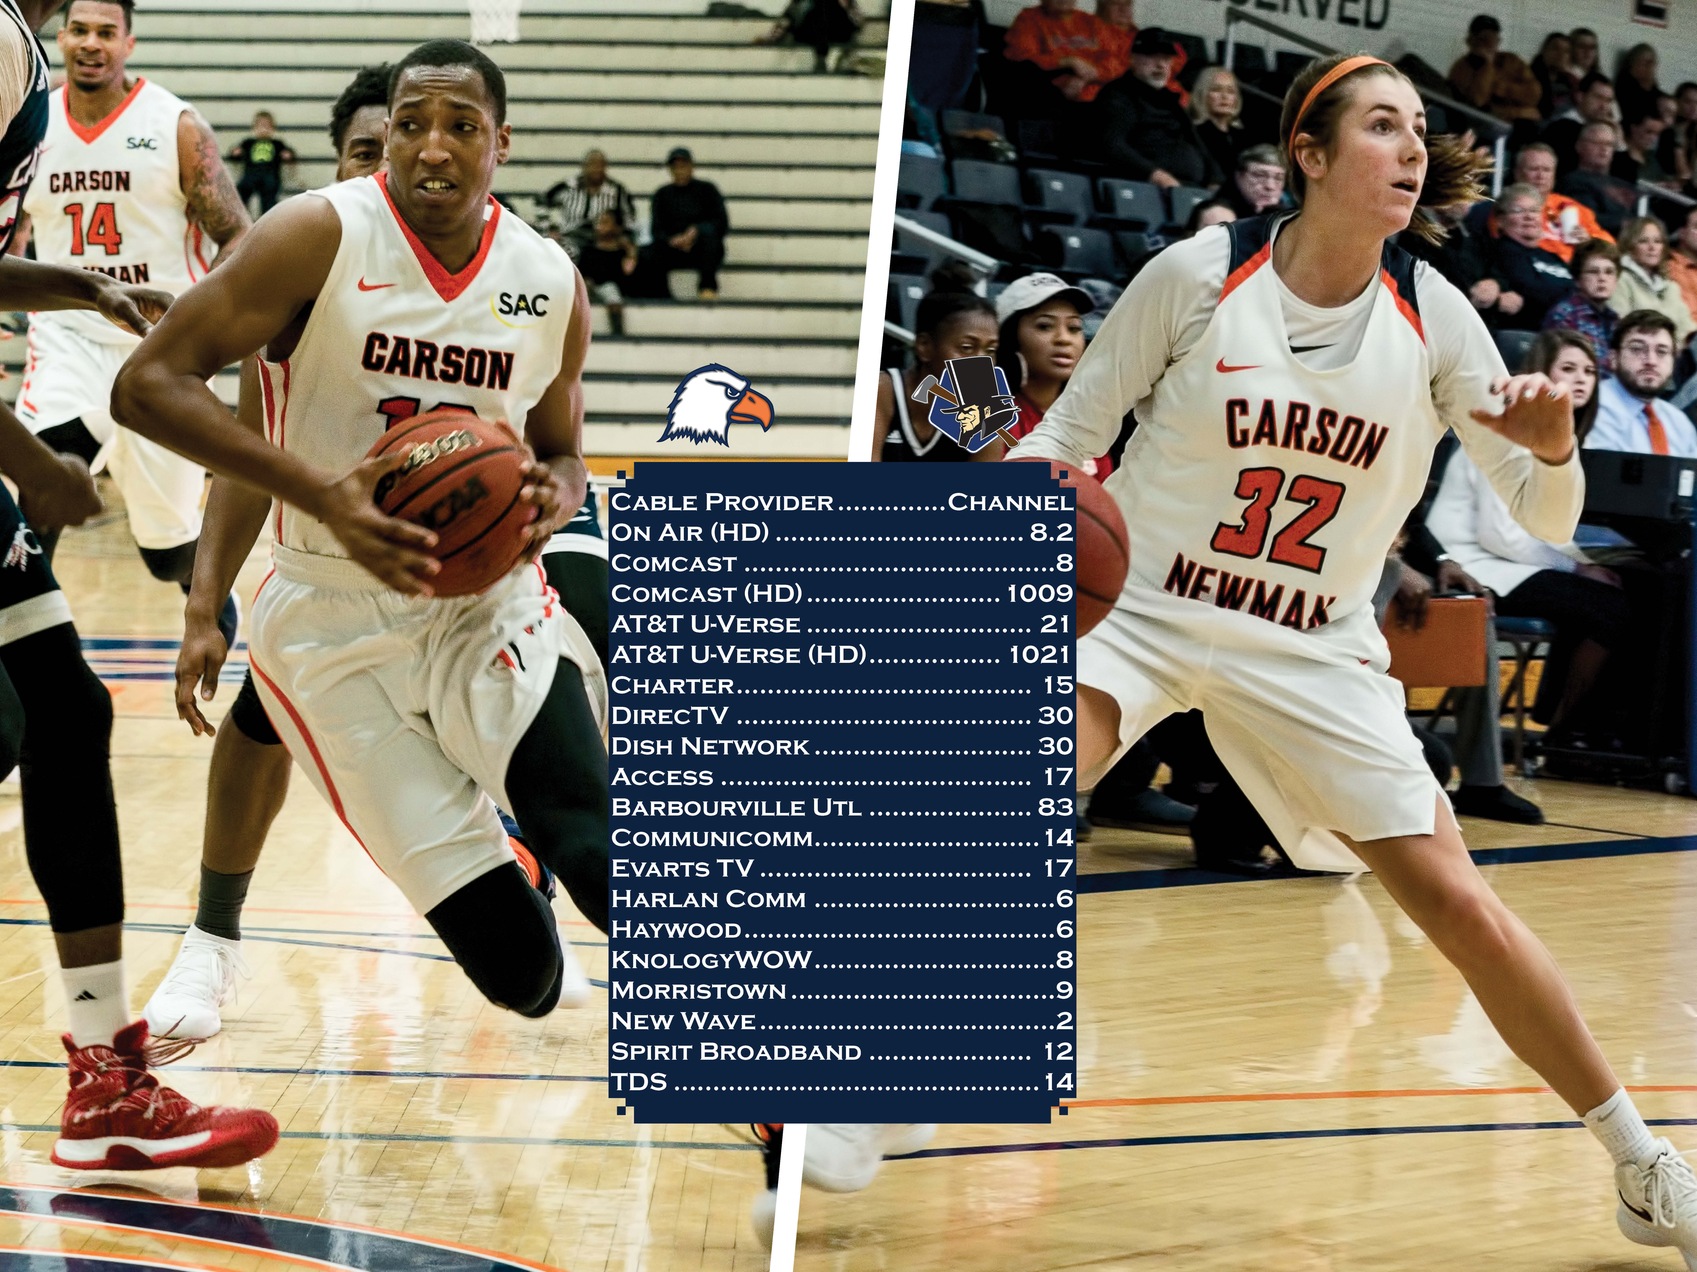 Carson-Newman's hoops doubleheader versus LMU set for local television broadcast